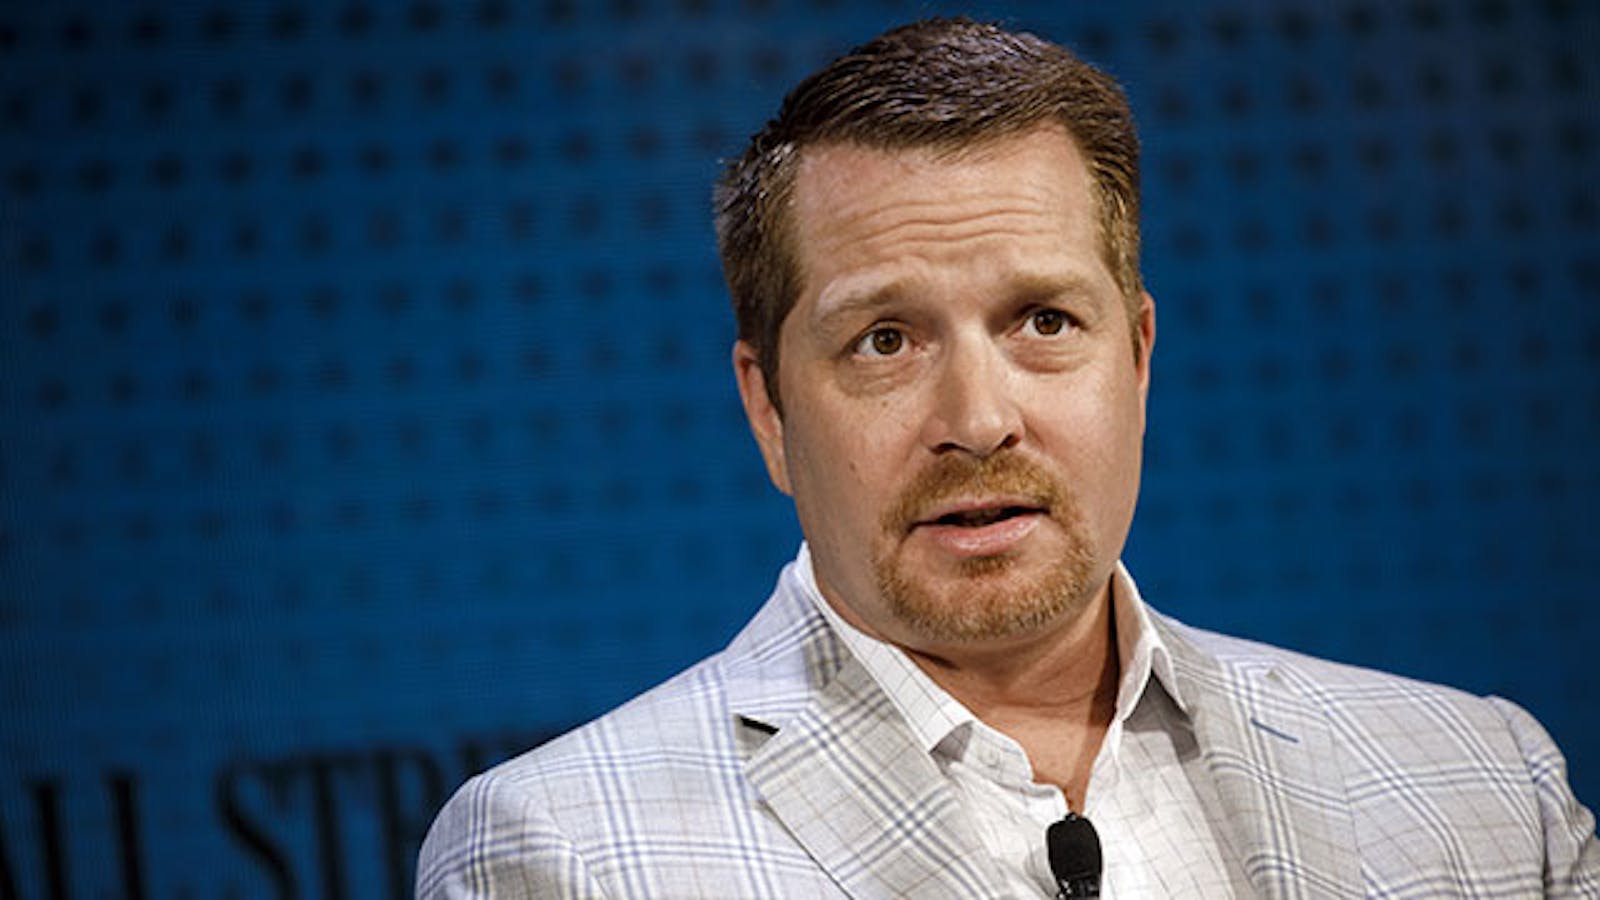 George Kurtz, co-founder and CEO of CrowdStrike. Photo: Bloomberg